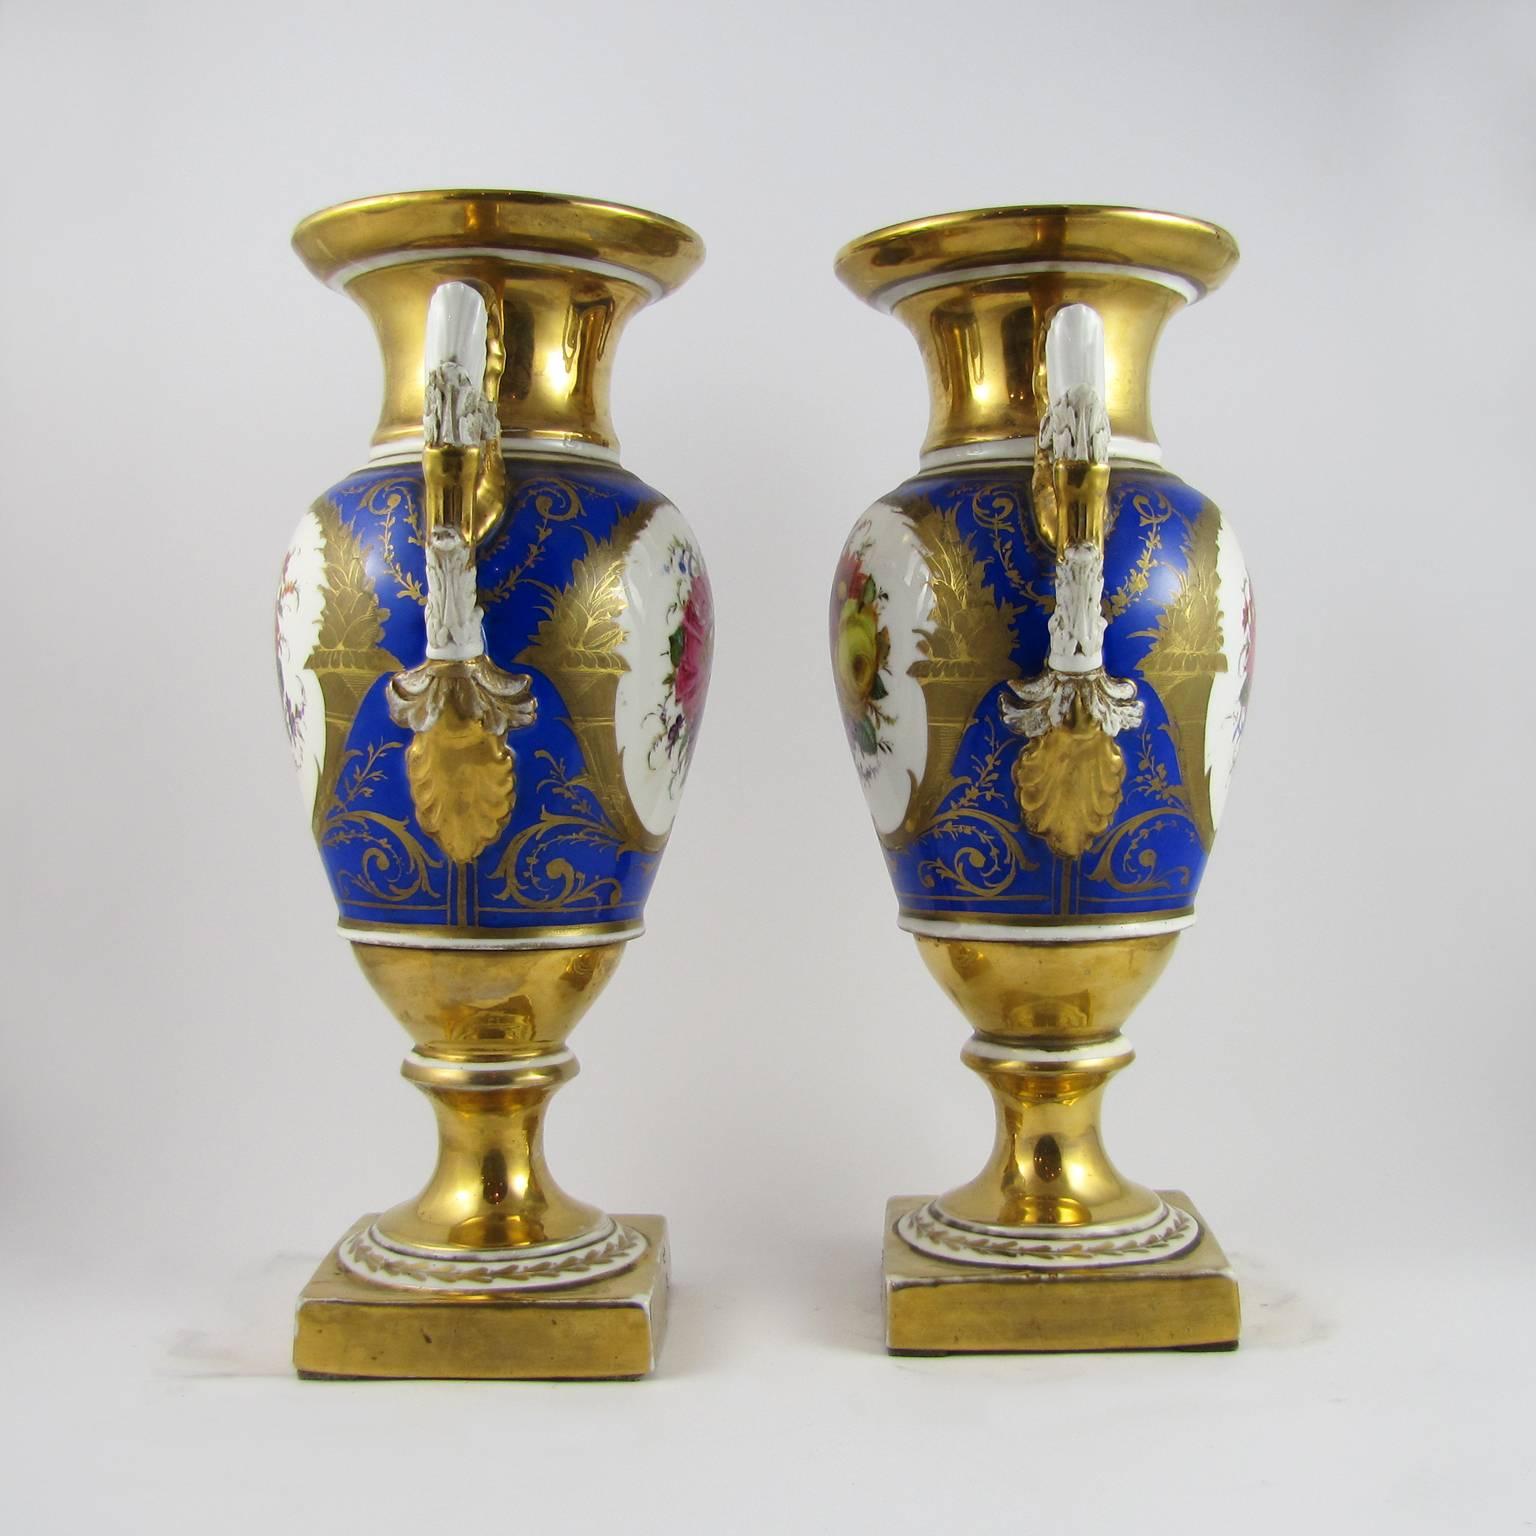 French 19th Century Pair of Parisian Empire Vases in Gilded and Polychrome Porcelain